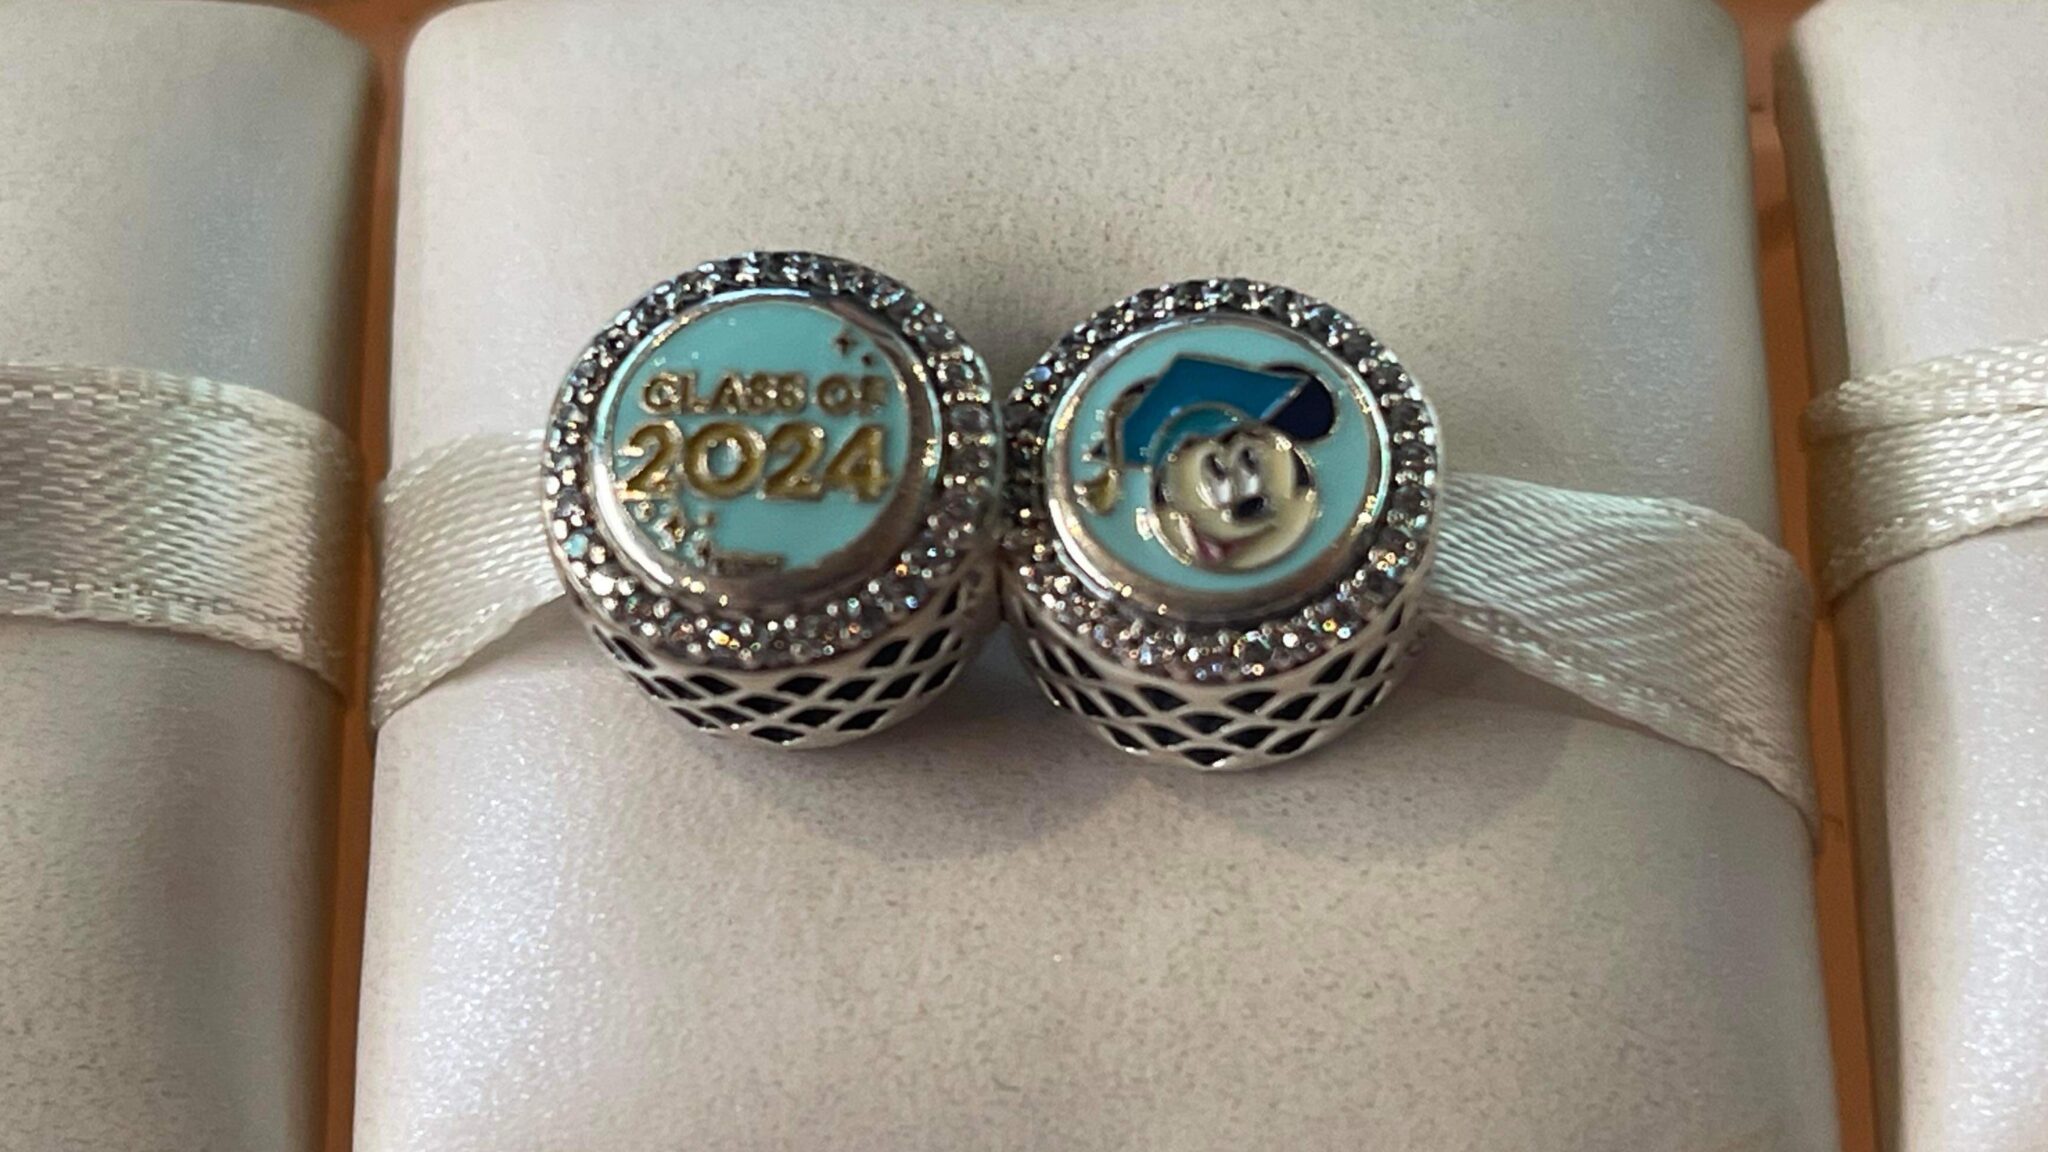 Mickey Mouse 2024 Graduation Pandora Charm Available At Epcot! Chip